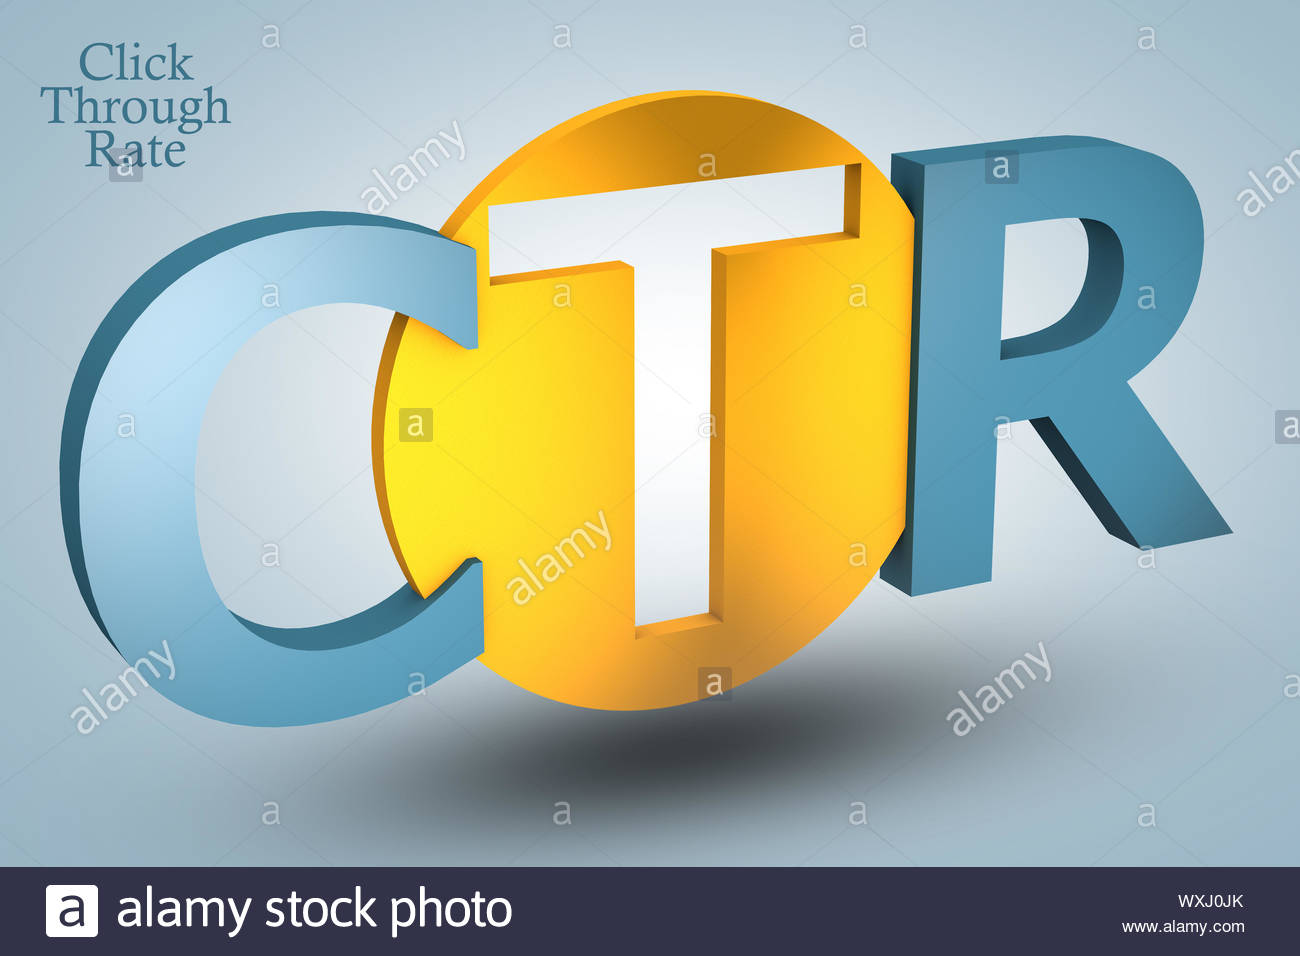 Acronym Concept Ctr For Click Through Rate On Blue Background